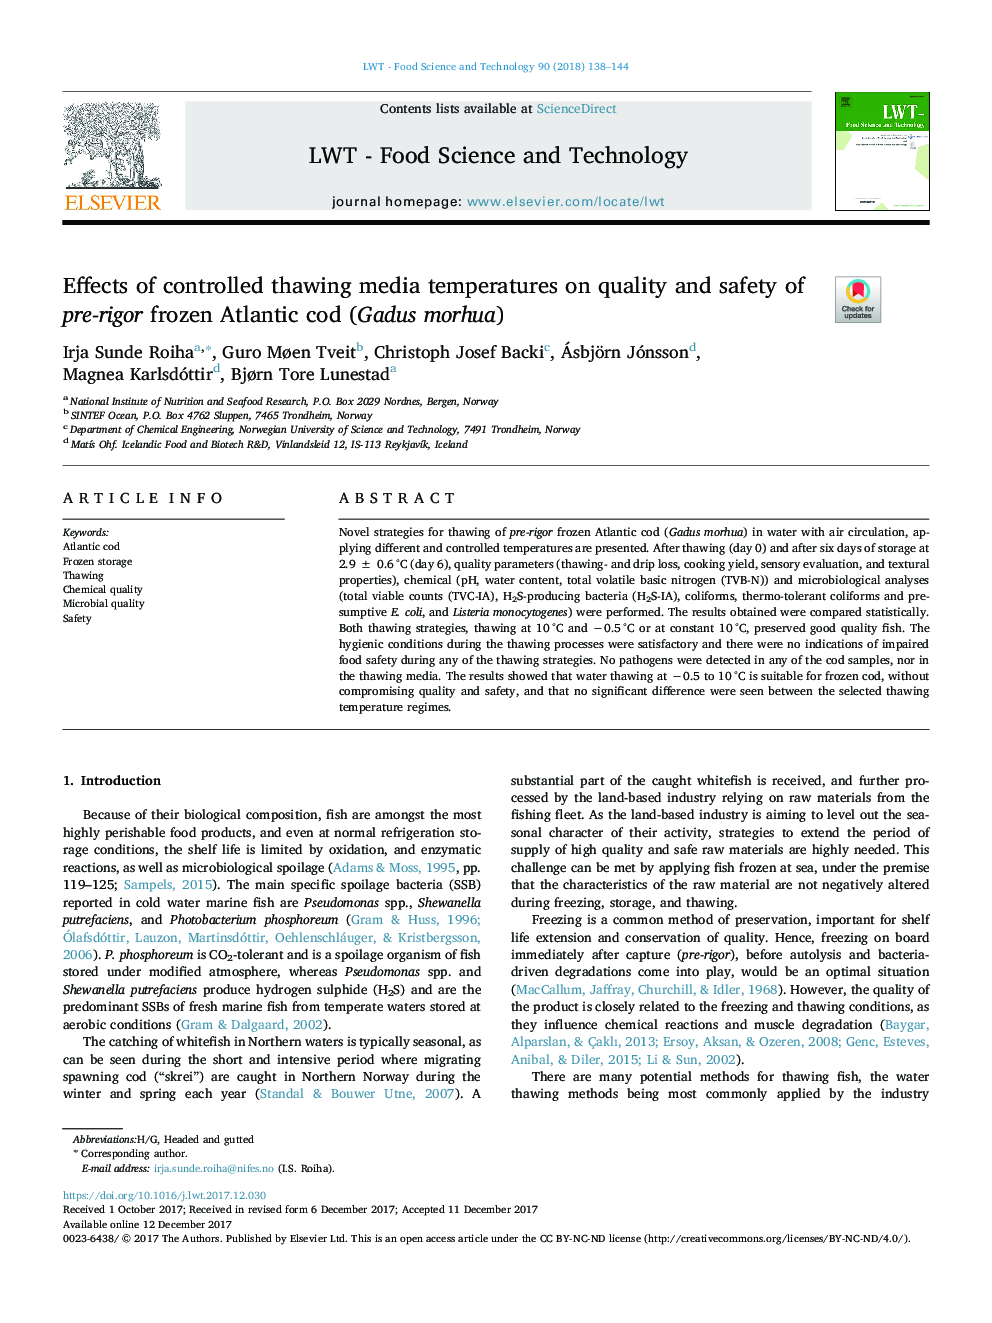 Effects of controlled thawing media temperatures on quality and safety of pre-rigor frozen Atlantic cod (Gadus morhua)